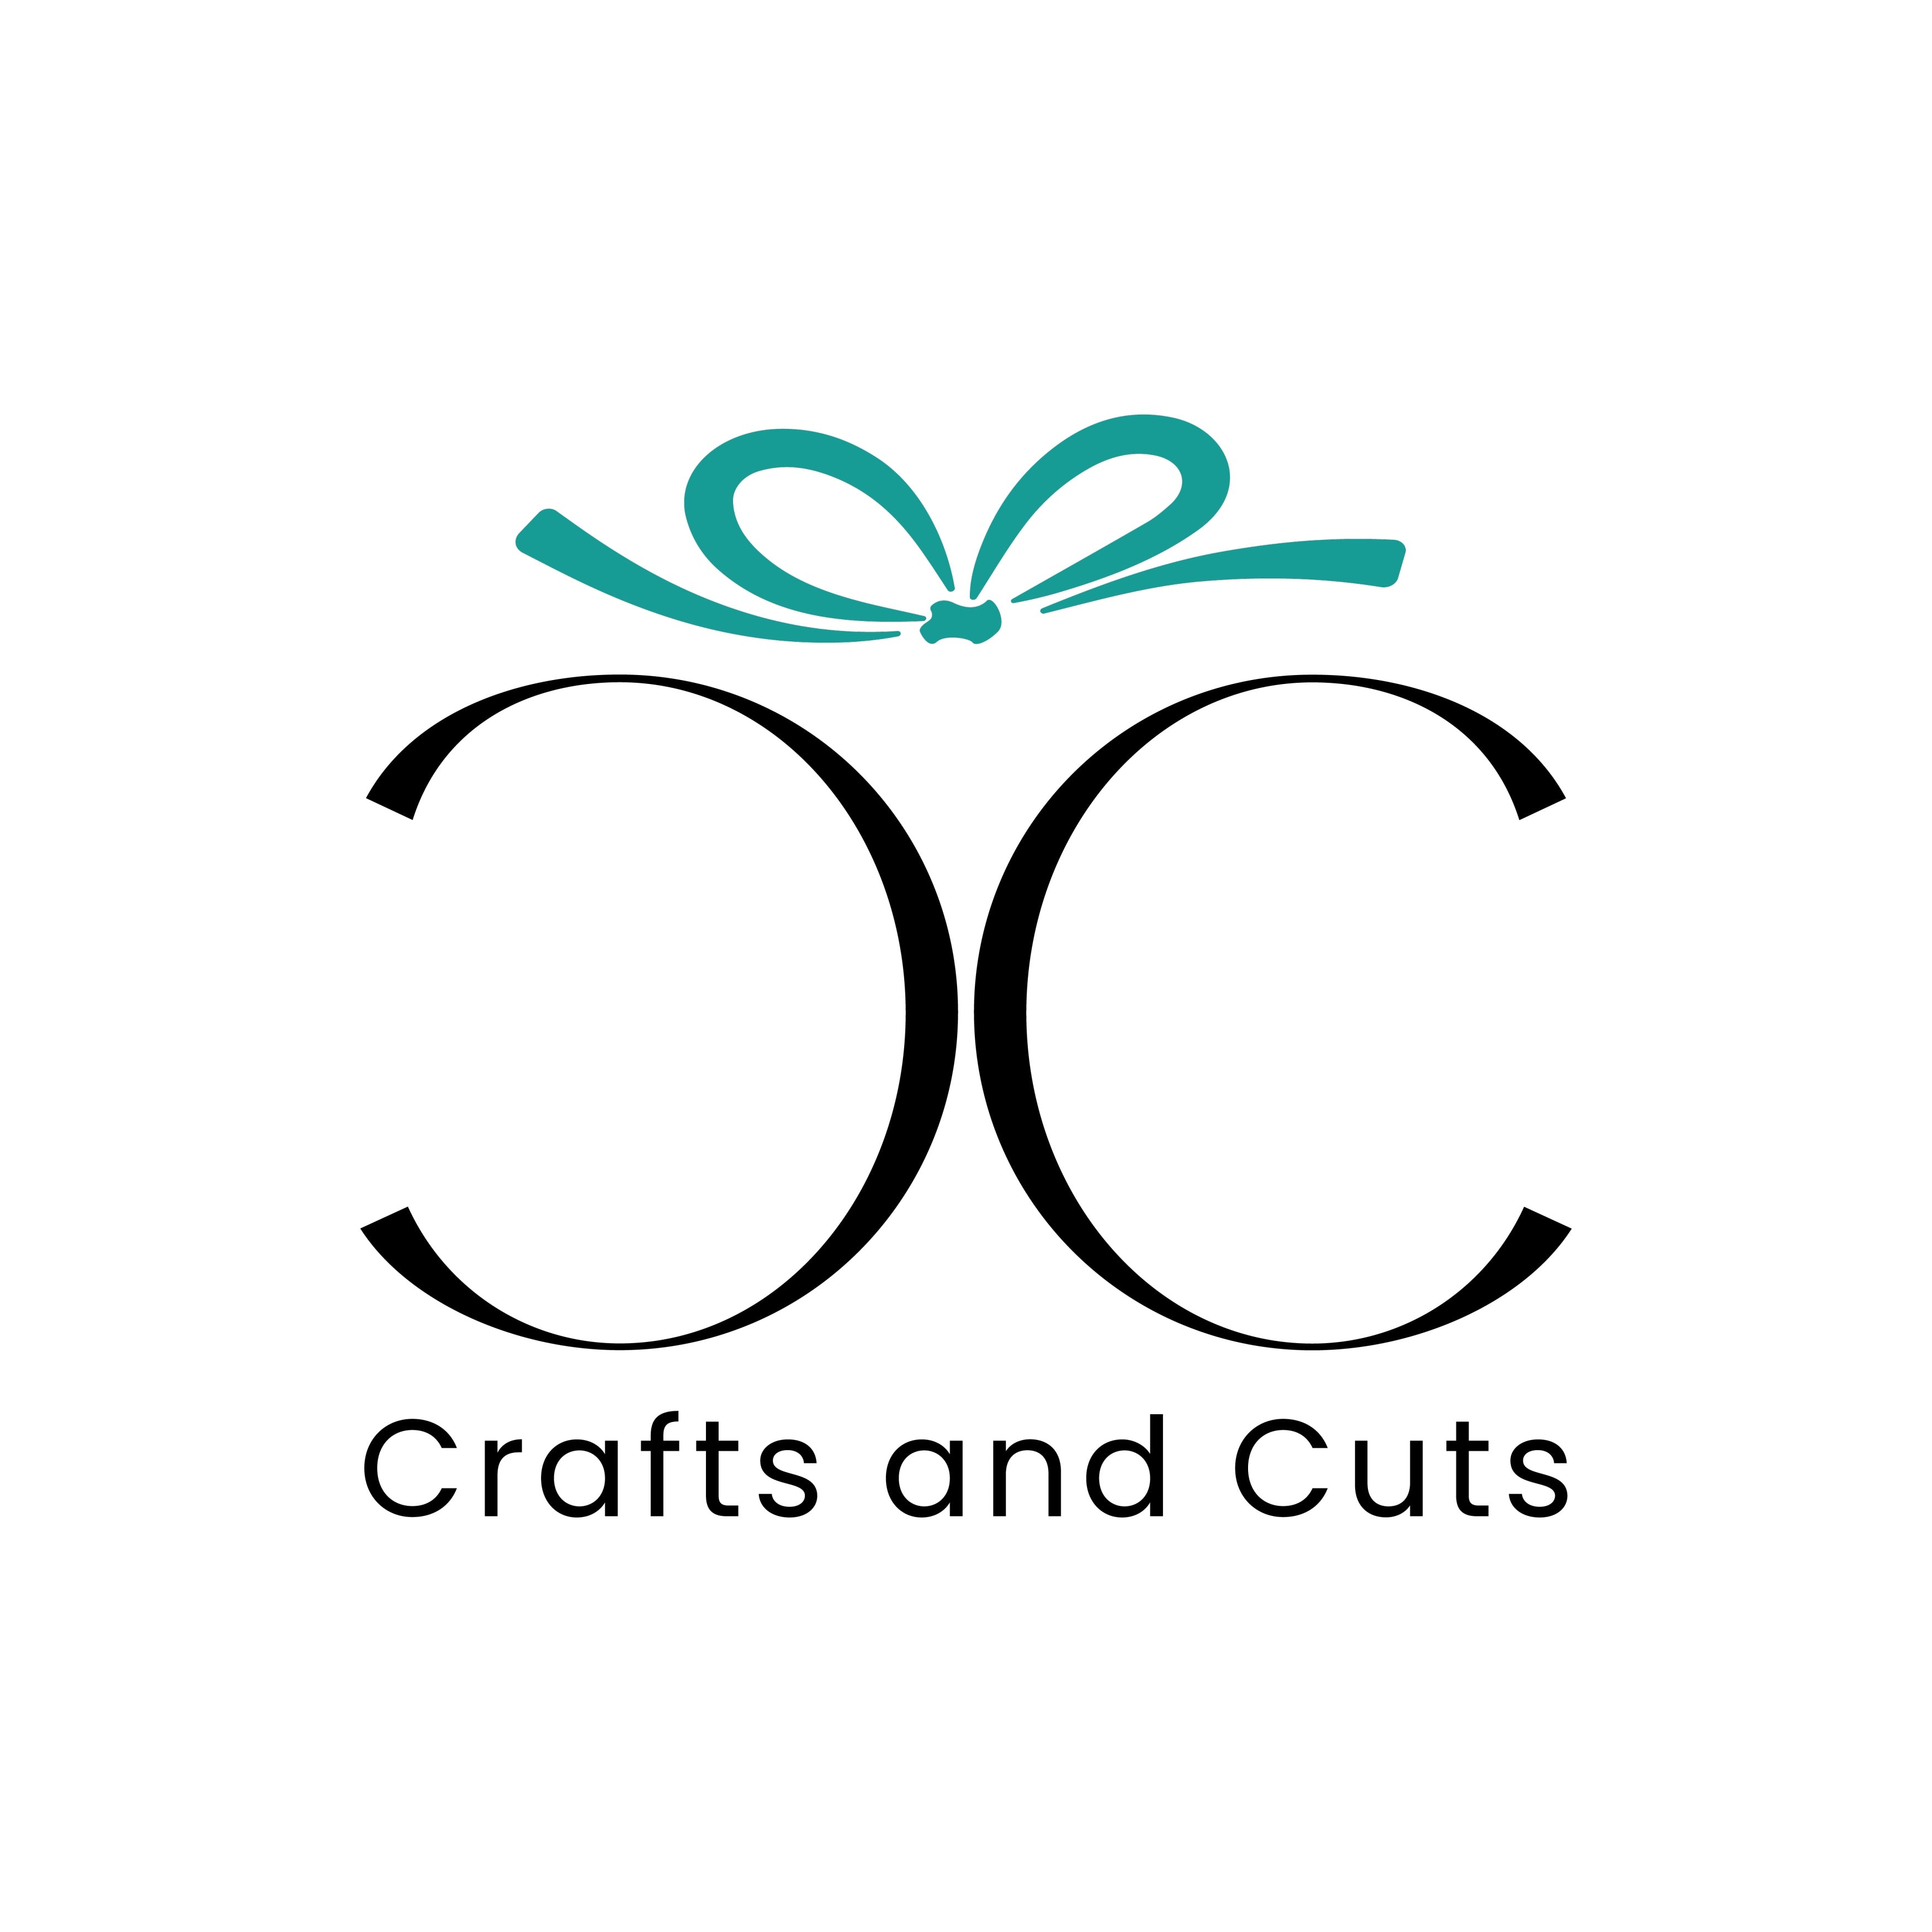 Crafts and Cuts